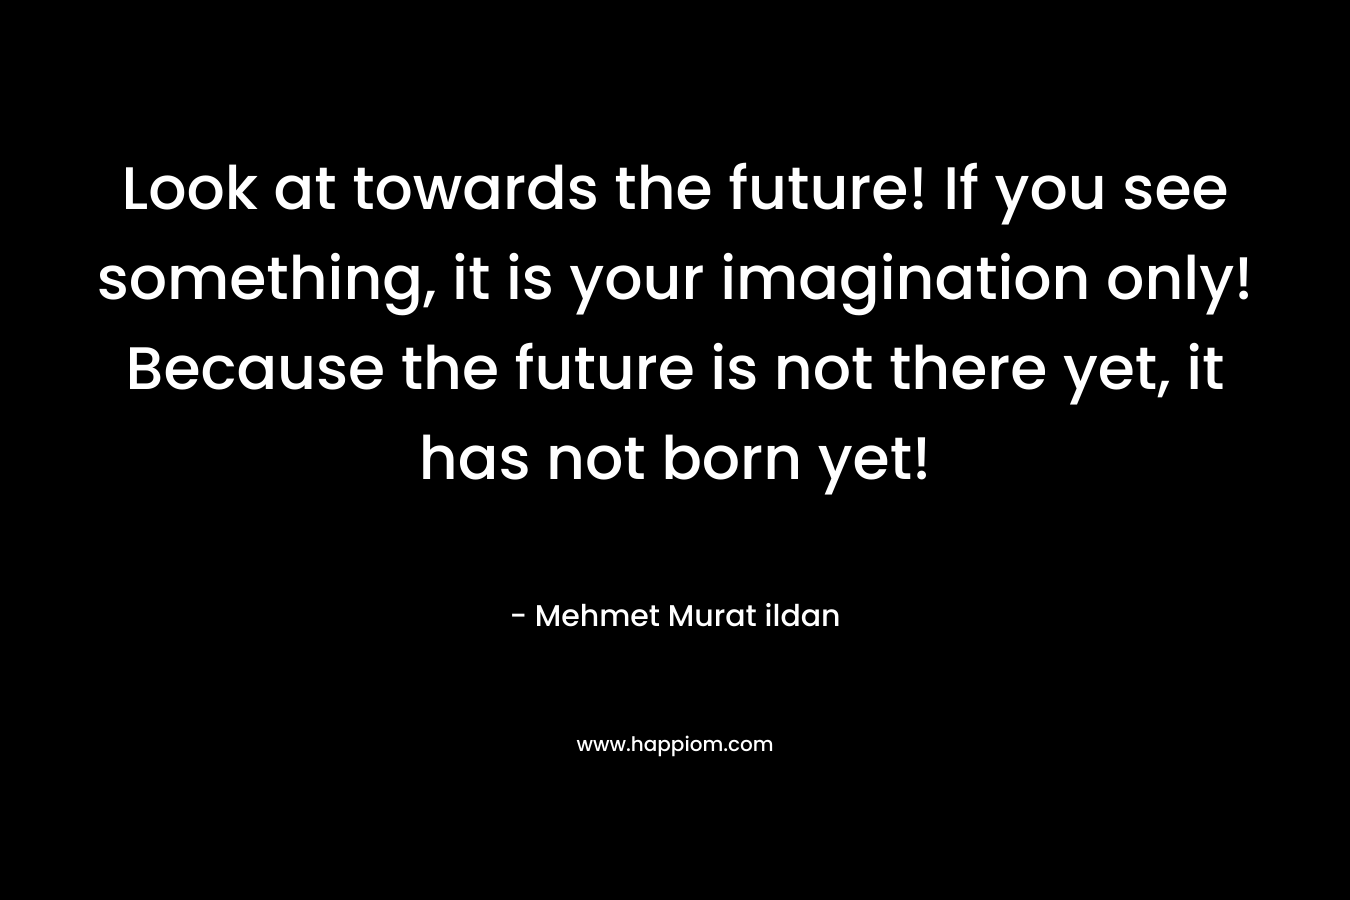 Look at towards the future! If you see something, it is your imagination only! Because the future is not there yet, it has not born yet!